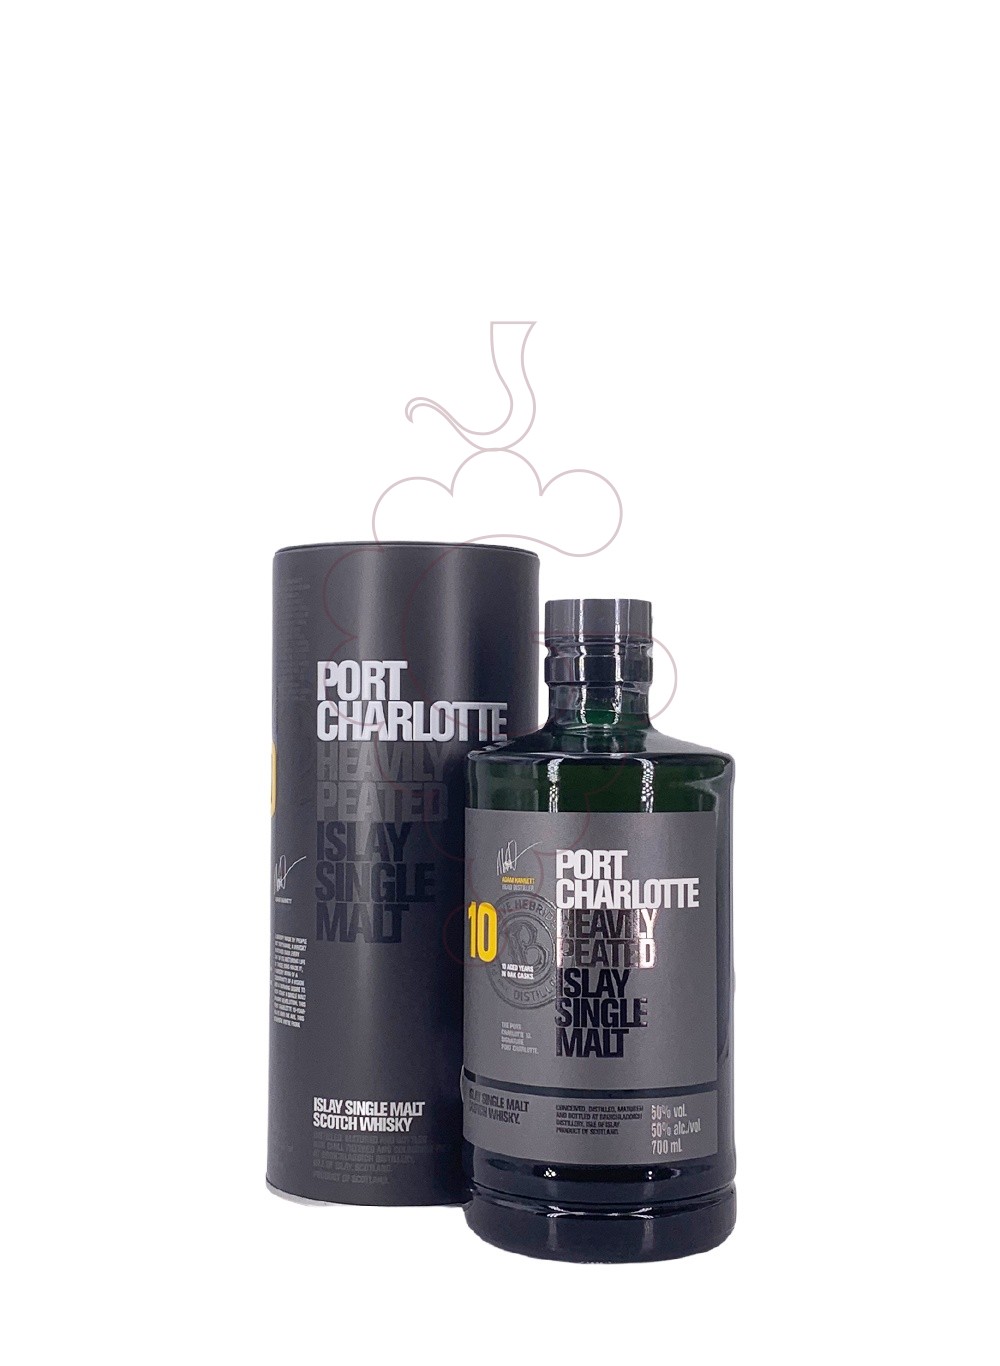 Foto Whisky Port charlotte heavily peated